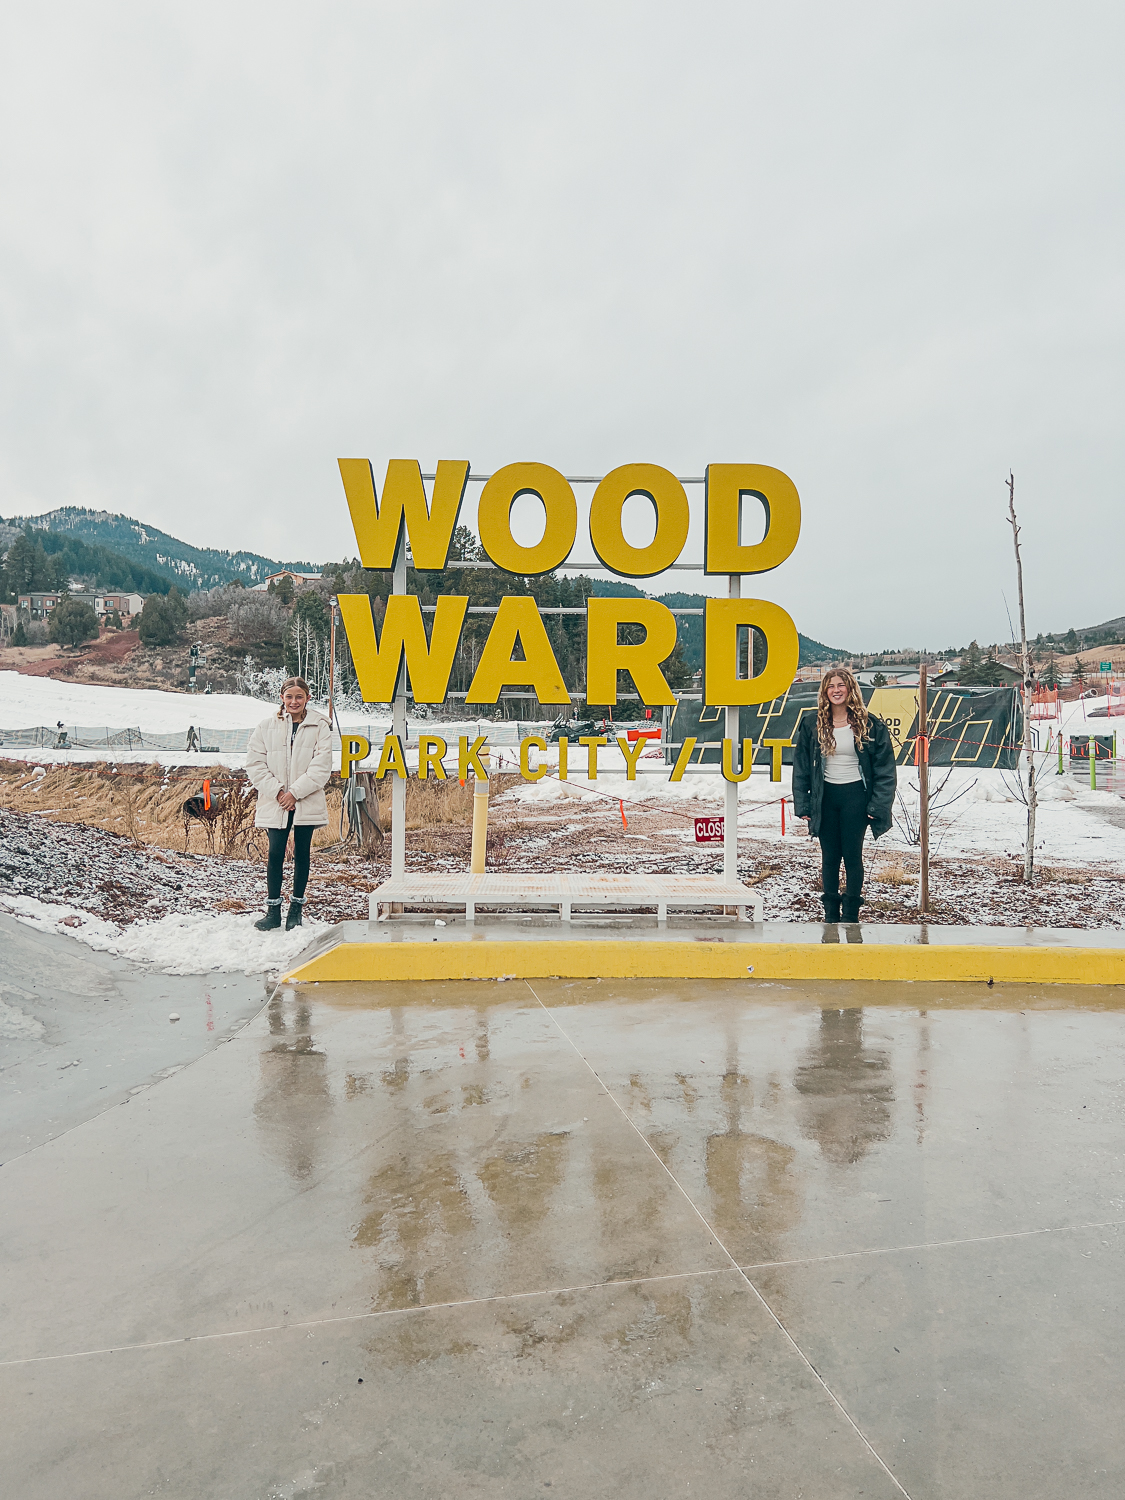 Pacific Globetrotters, budget family travel blog, shares 5 Days in Park City In The Winter With A Dog. Woodward Park City